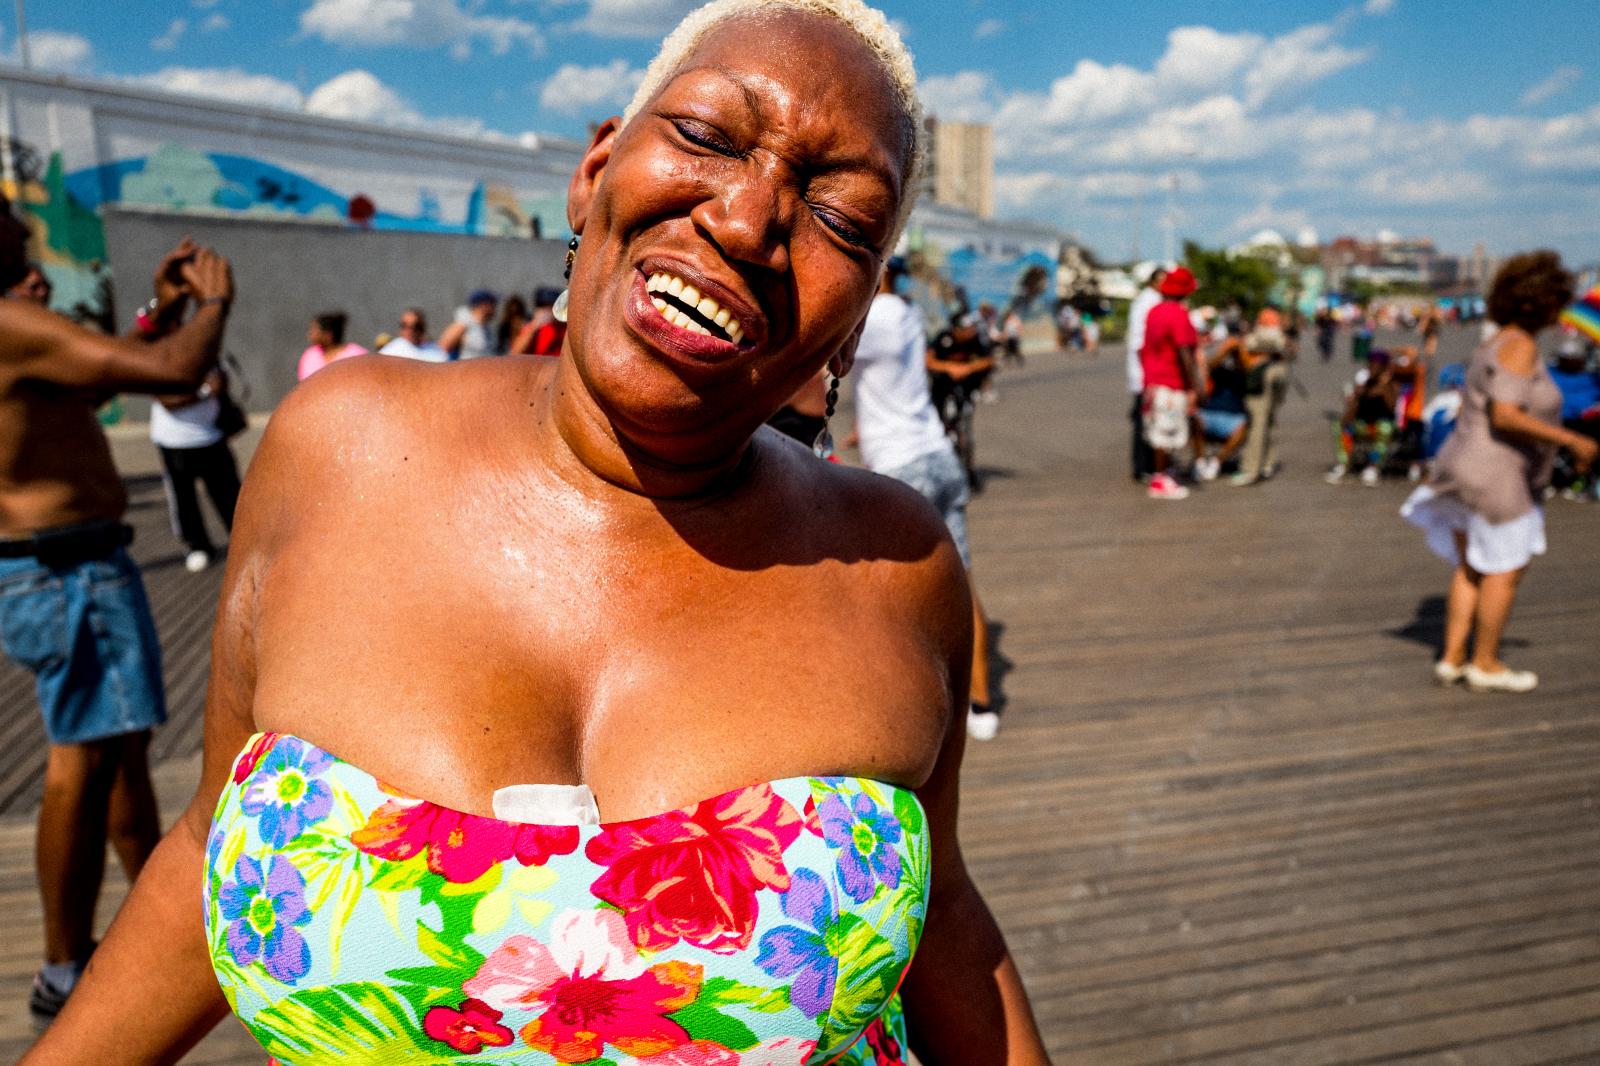 Image from Street Photography/Color Works -  Justine  Riegelmann Boardwalk, Brooklyn NYC  July 2016 